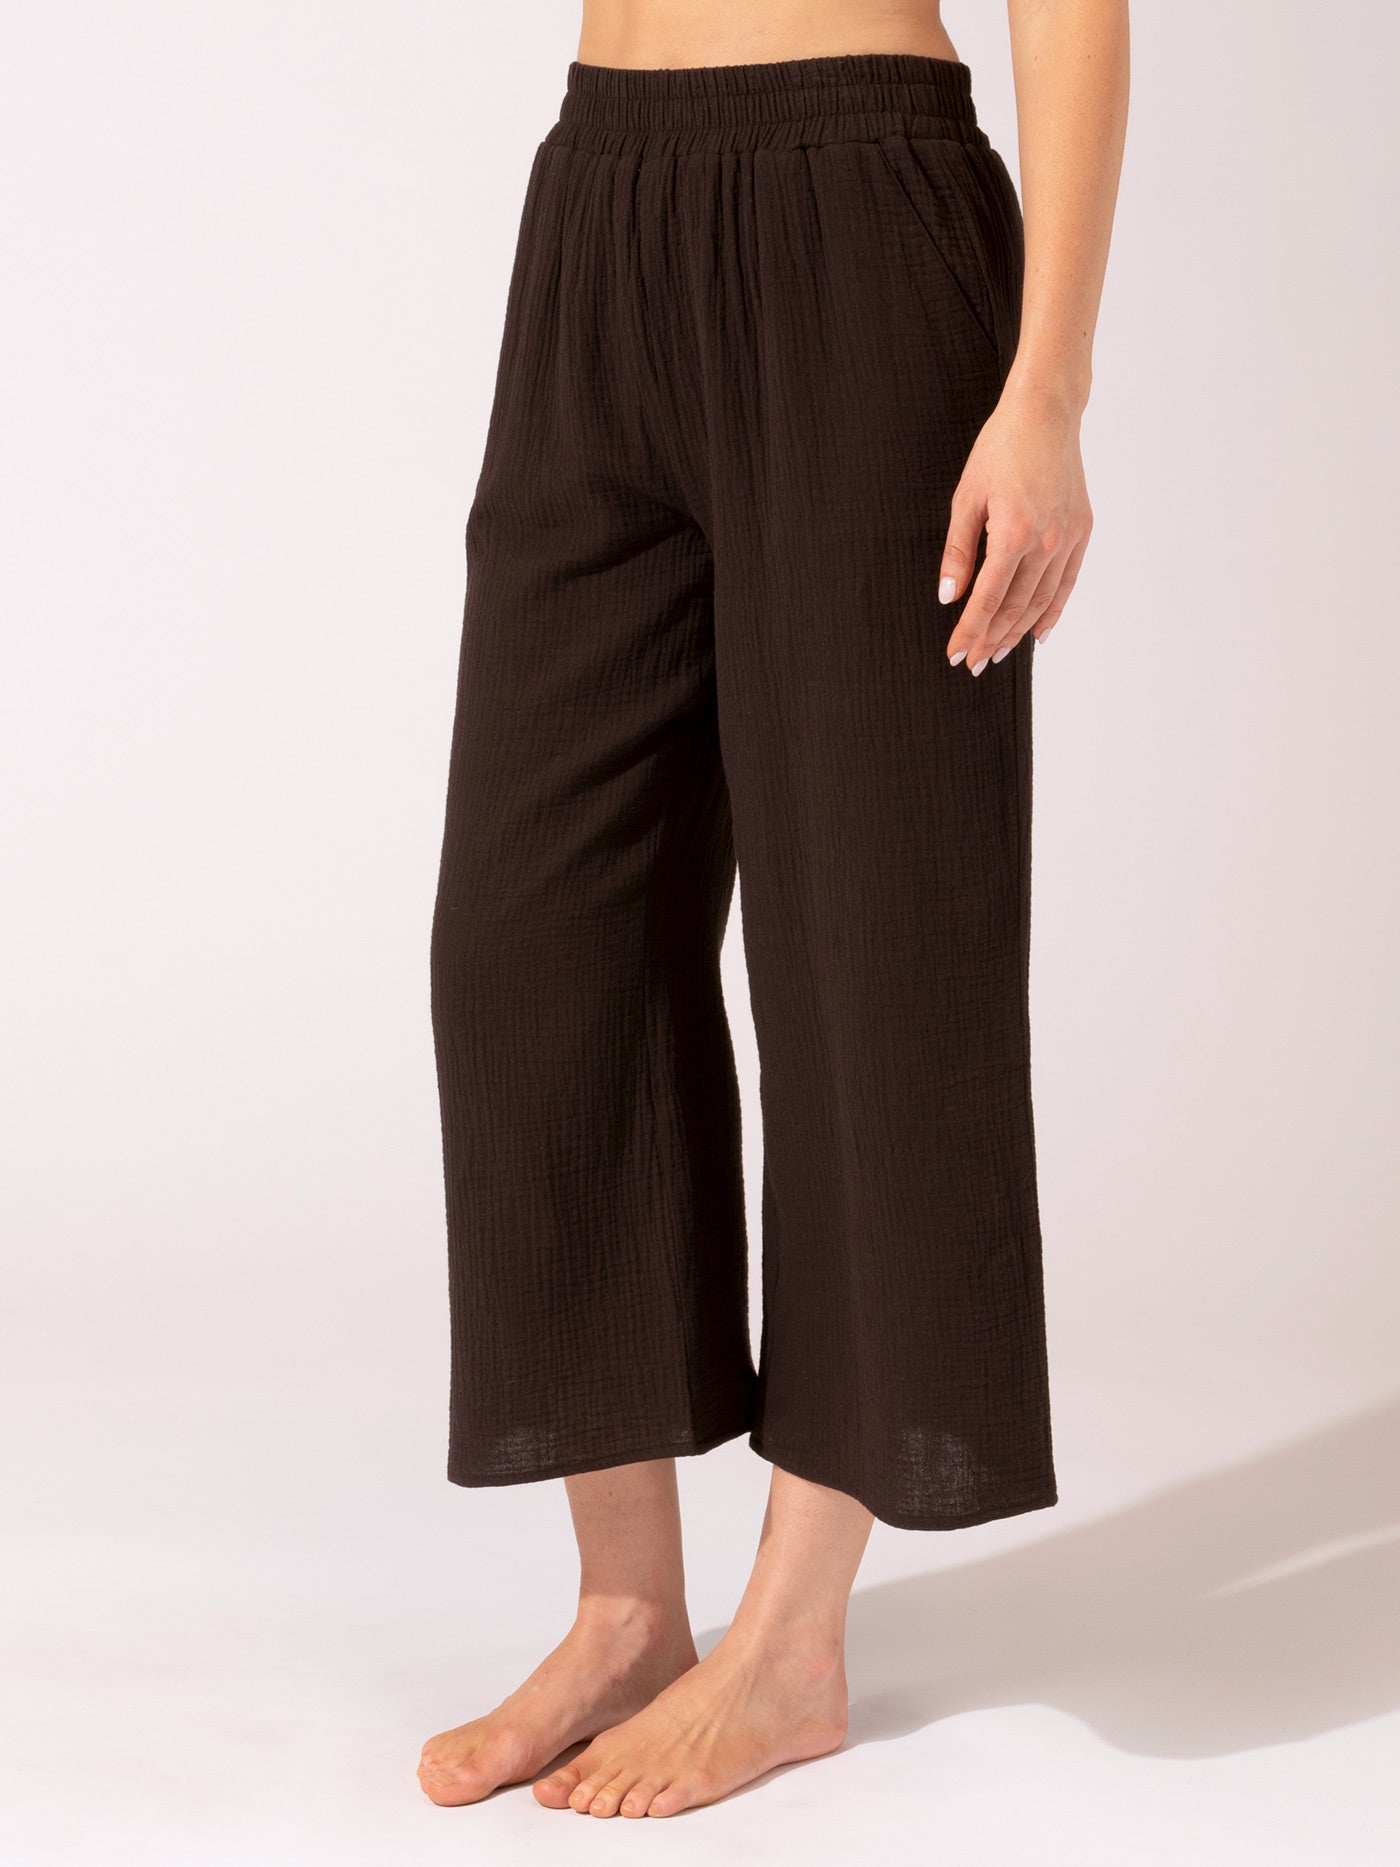 Women's Pants – Threads 4 Thought